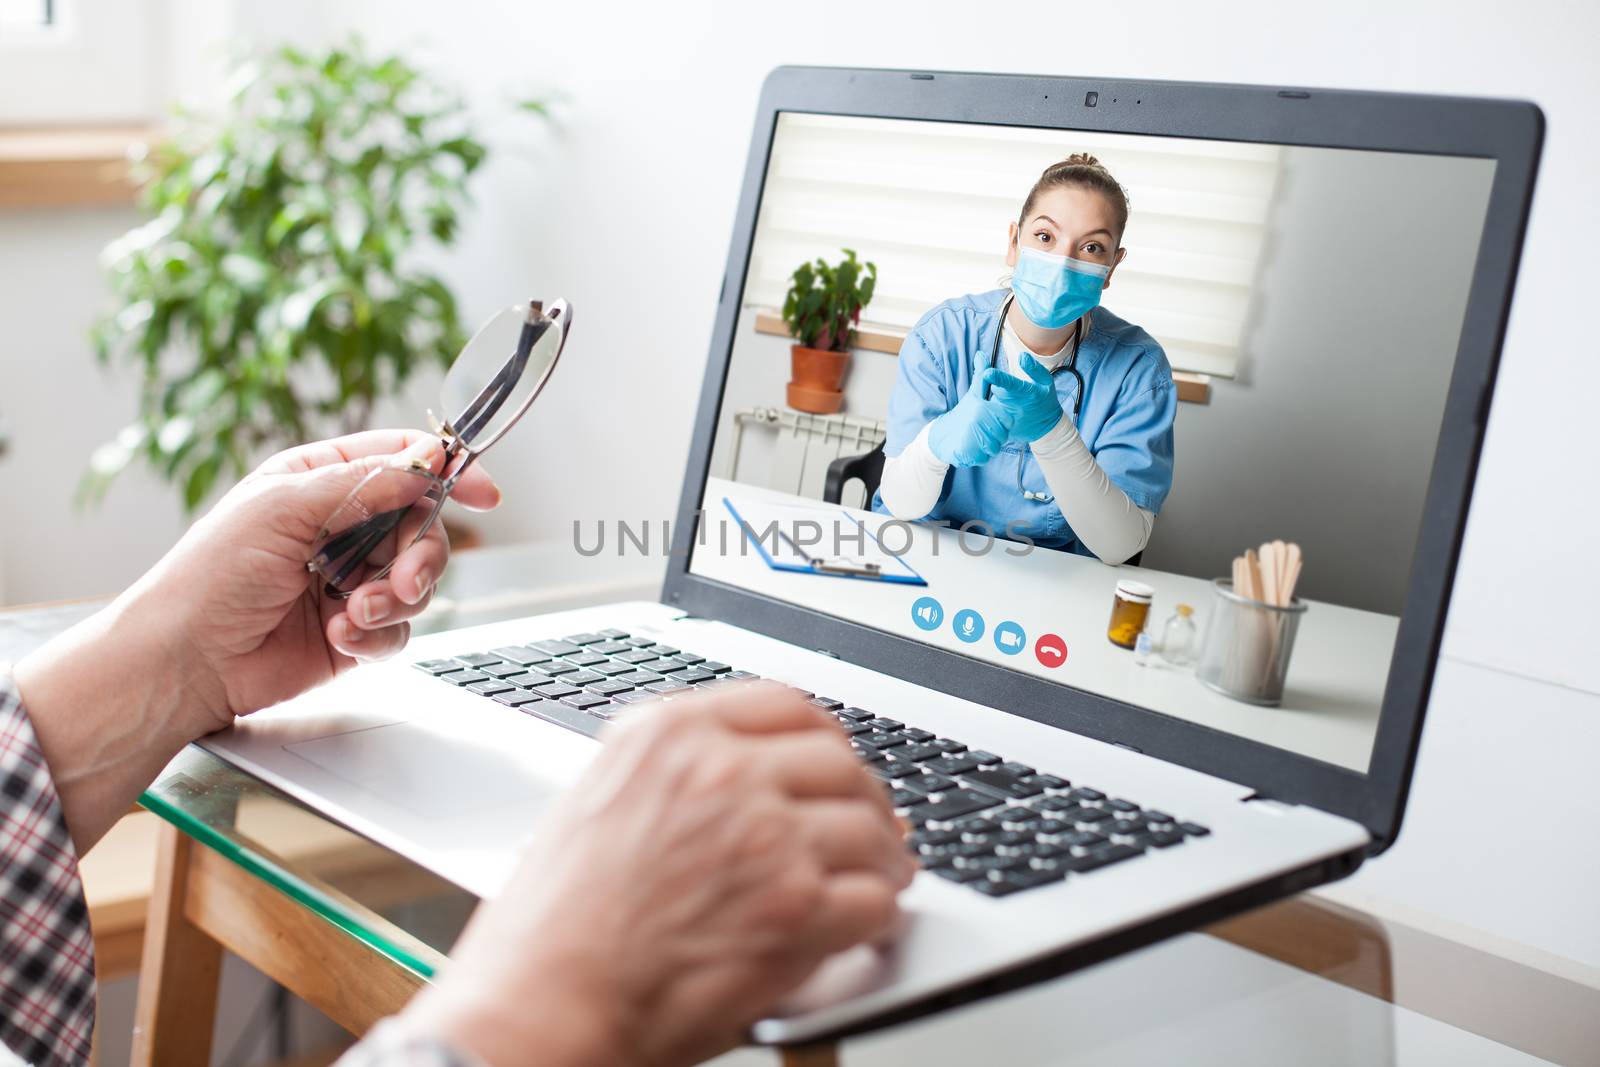 Virtual doctor visit,telemedicine healthcare concept,young female doctor giving advice over laptop computer screen to elderly woman,hands holding glasses & medical worker on display,remote appointment